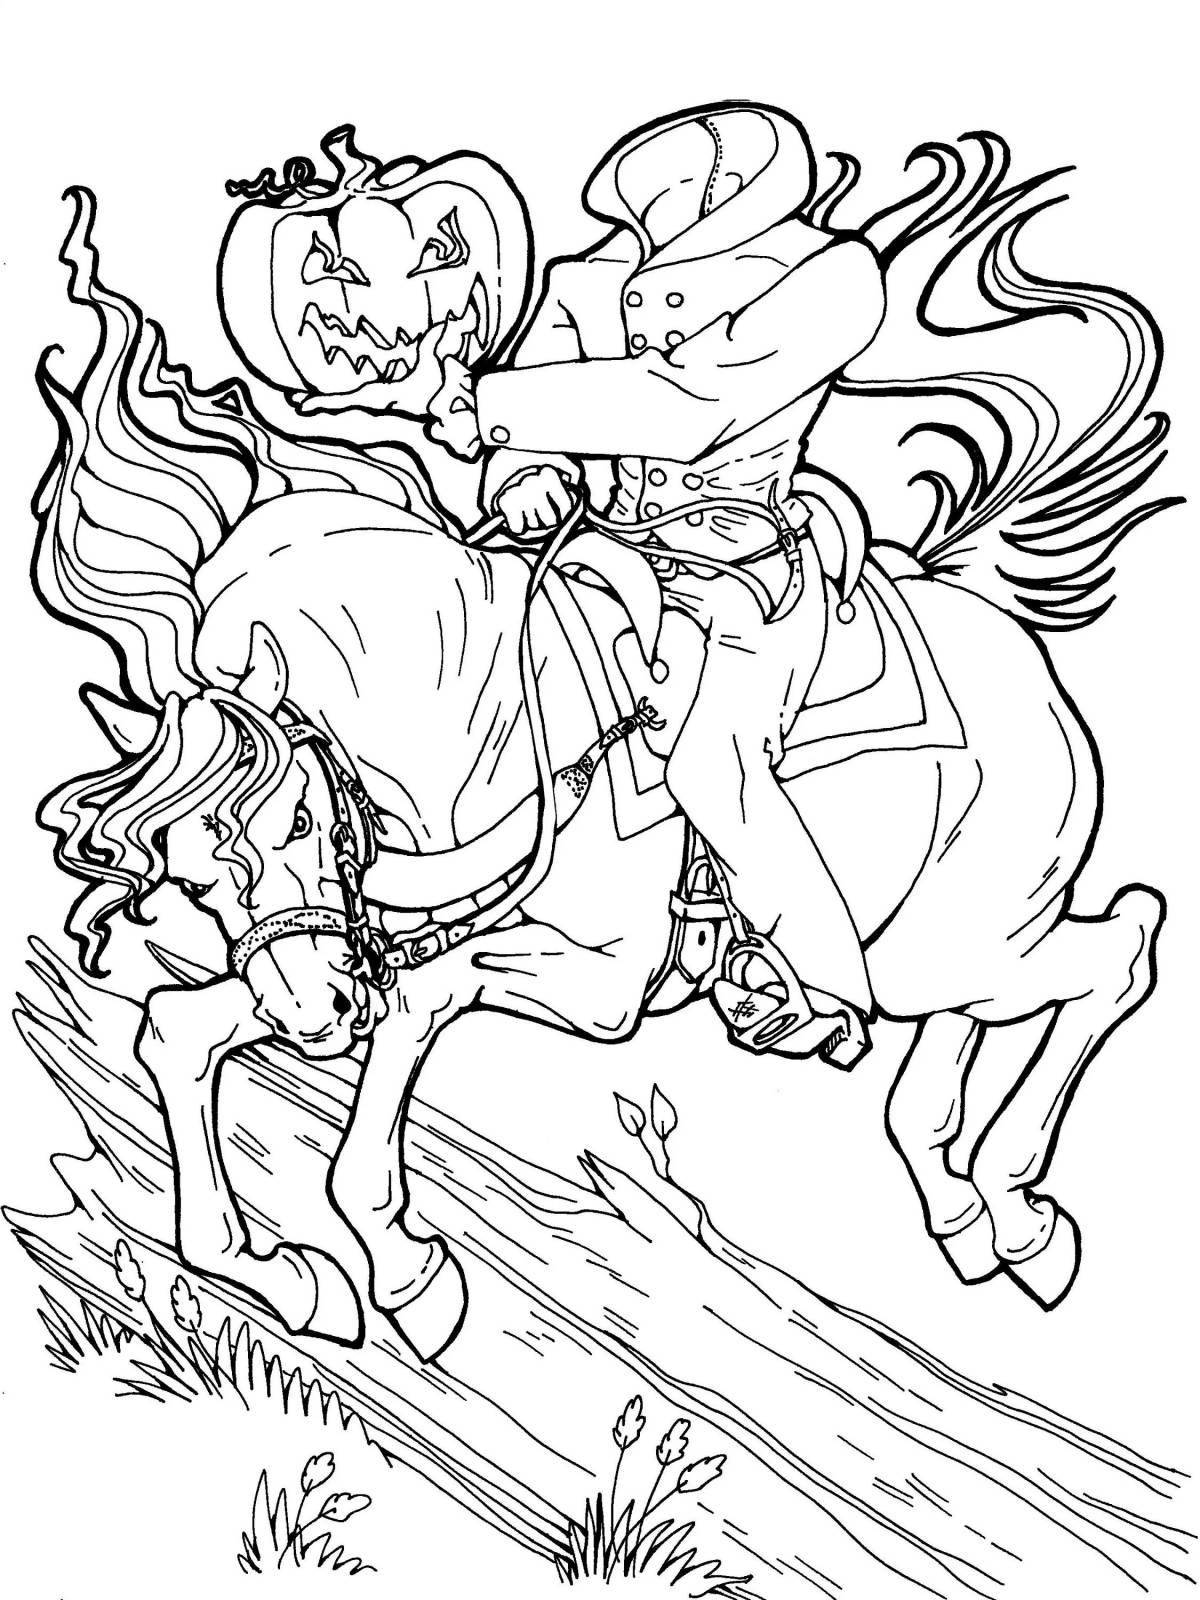 Coloring page playful humpbacked horse